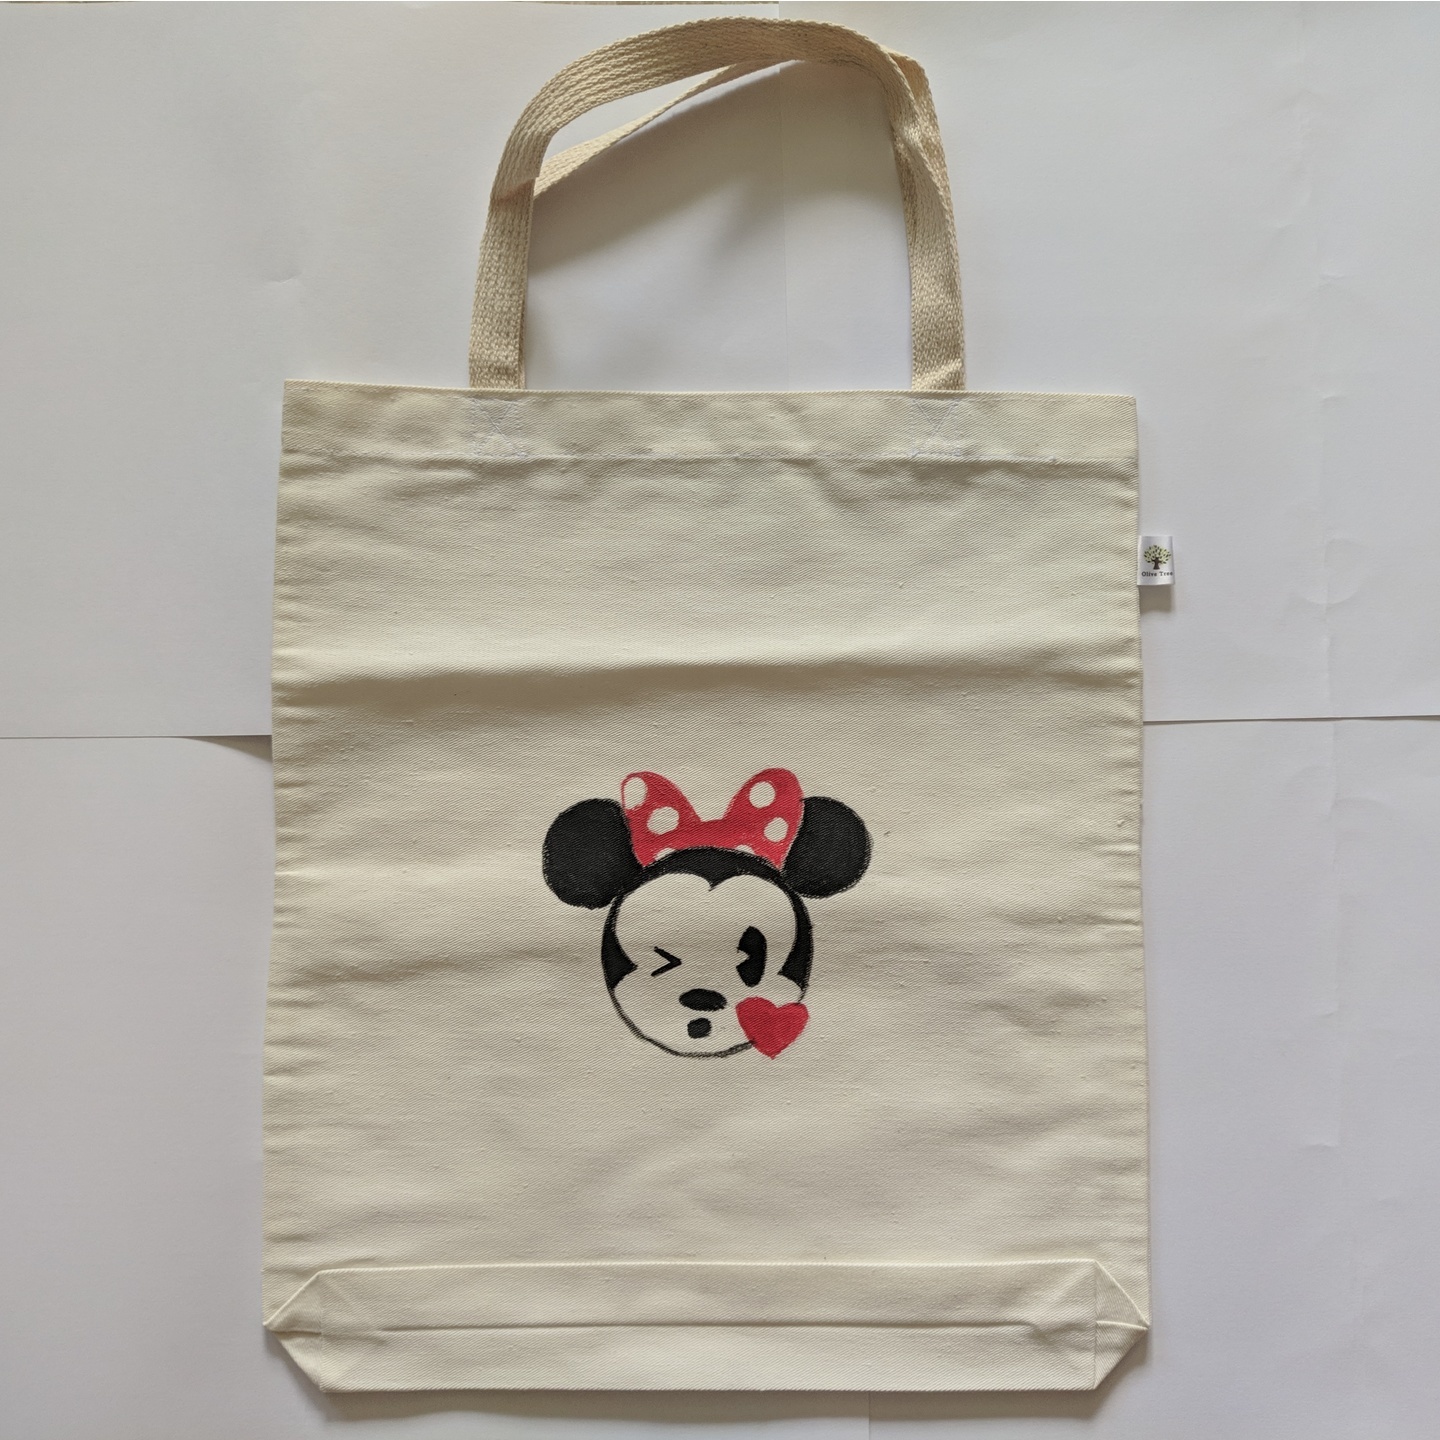 Gladiolus Totes, Minnie Mouse